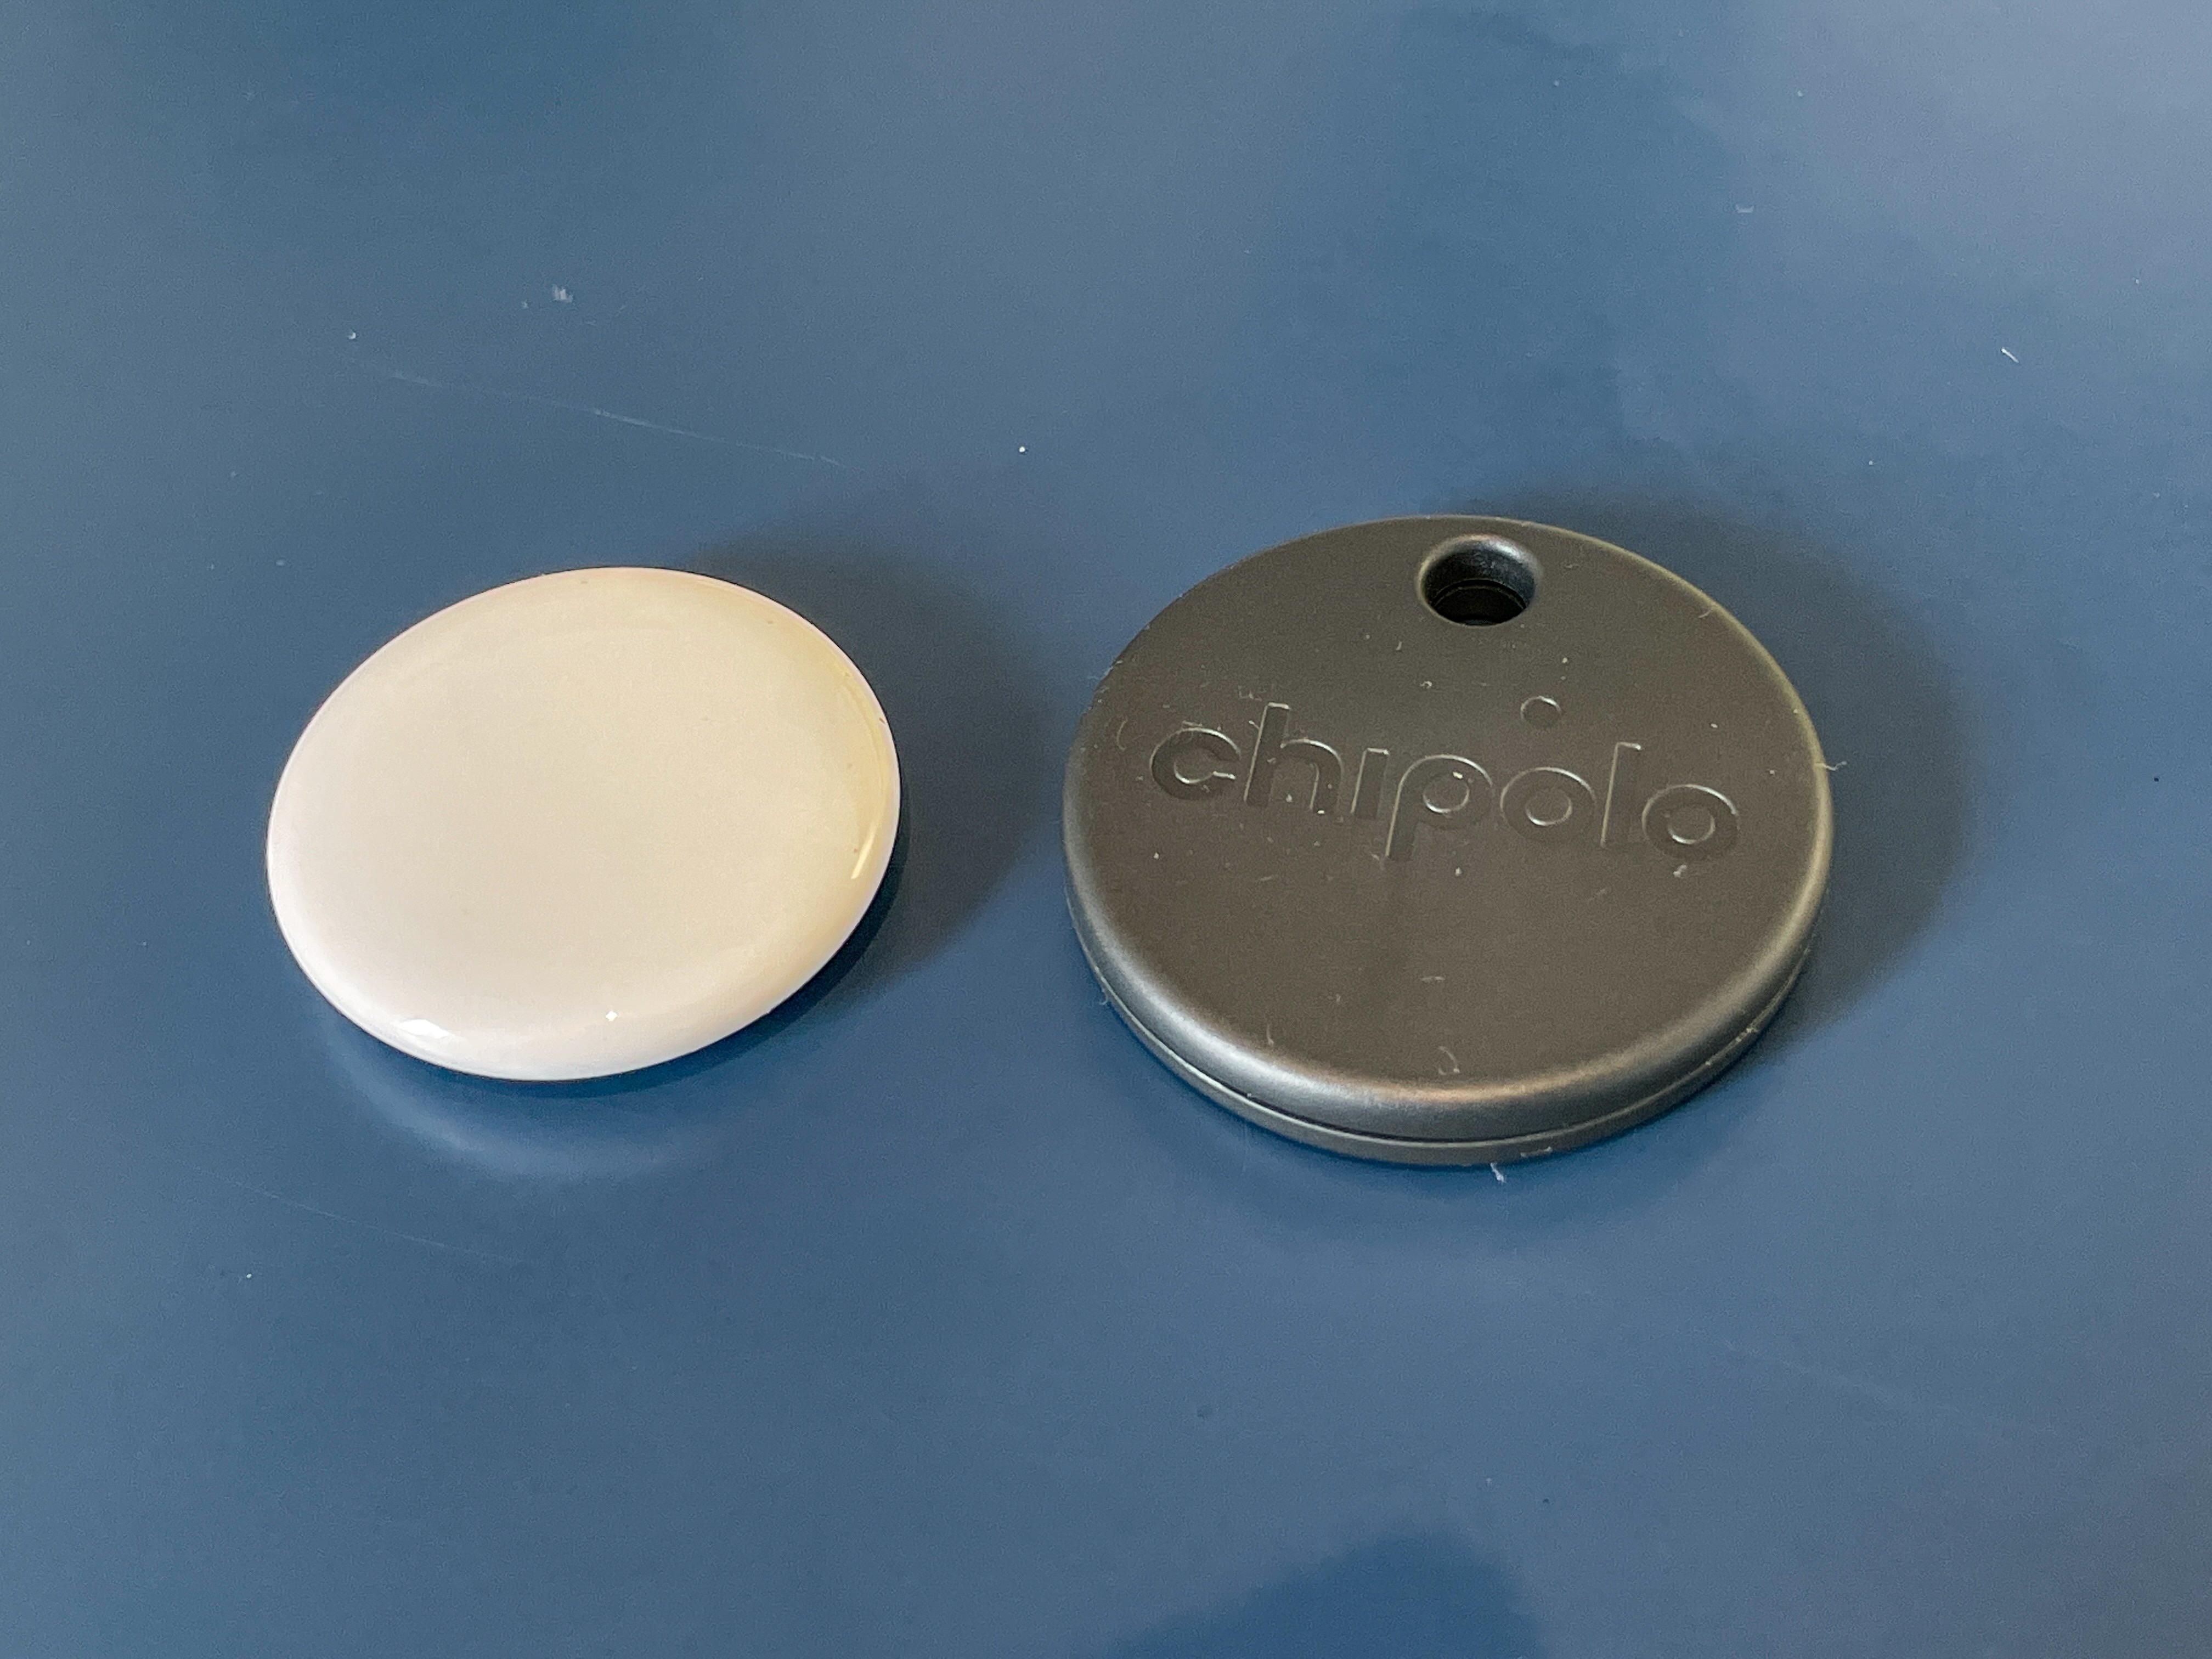 Chipolo ONE Spot review: the only real alternative to AirTag - General  Discussion Discussions on AppleInsider Forums